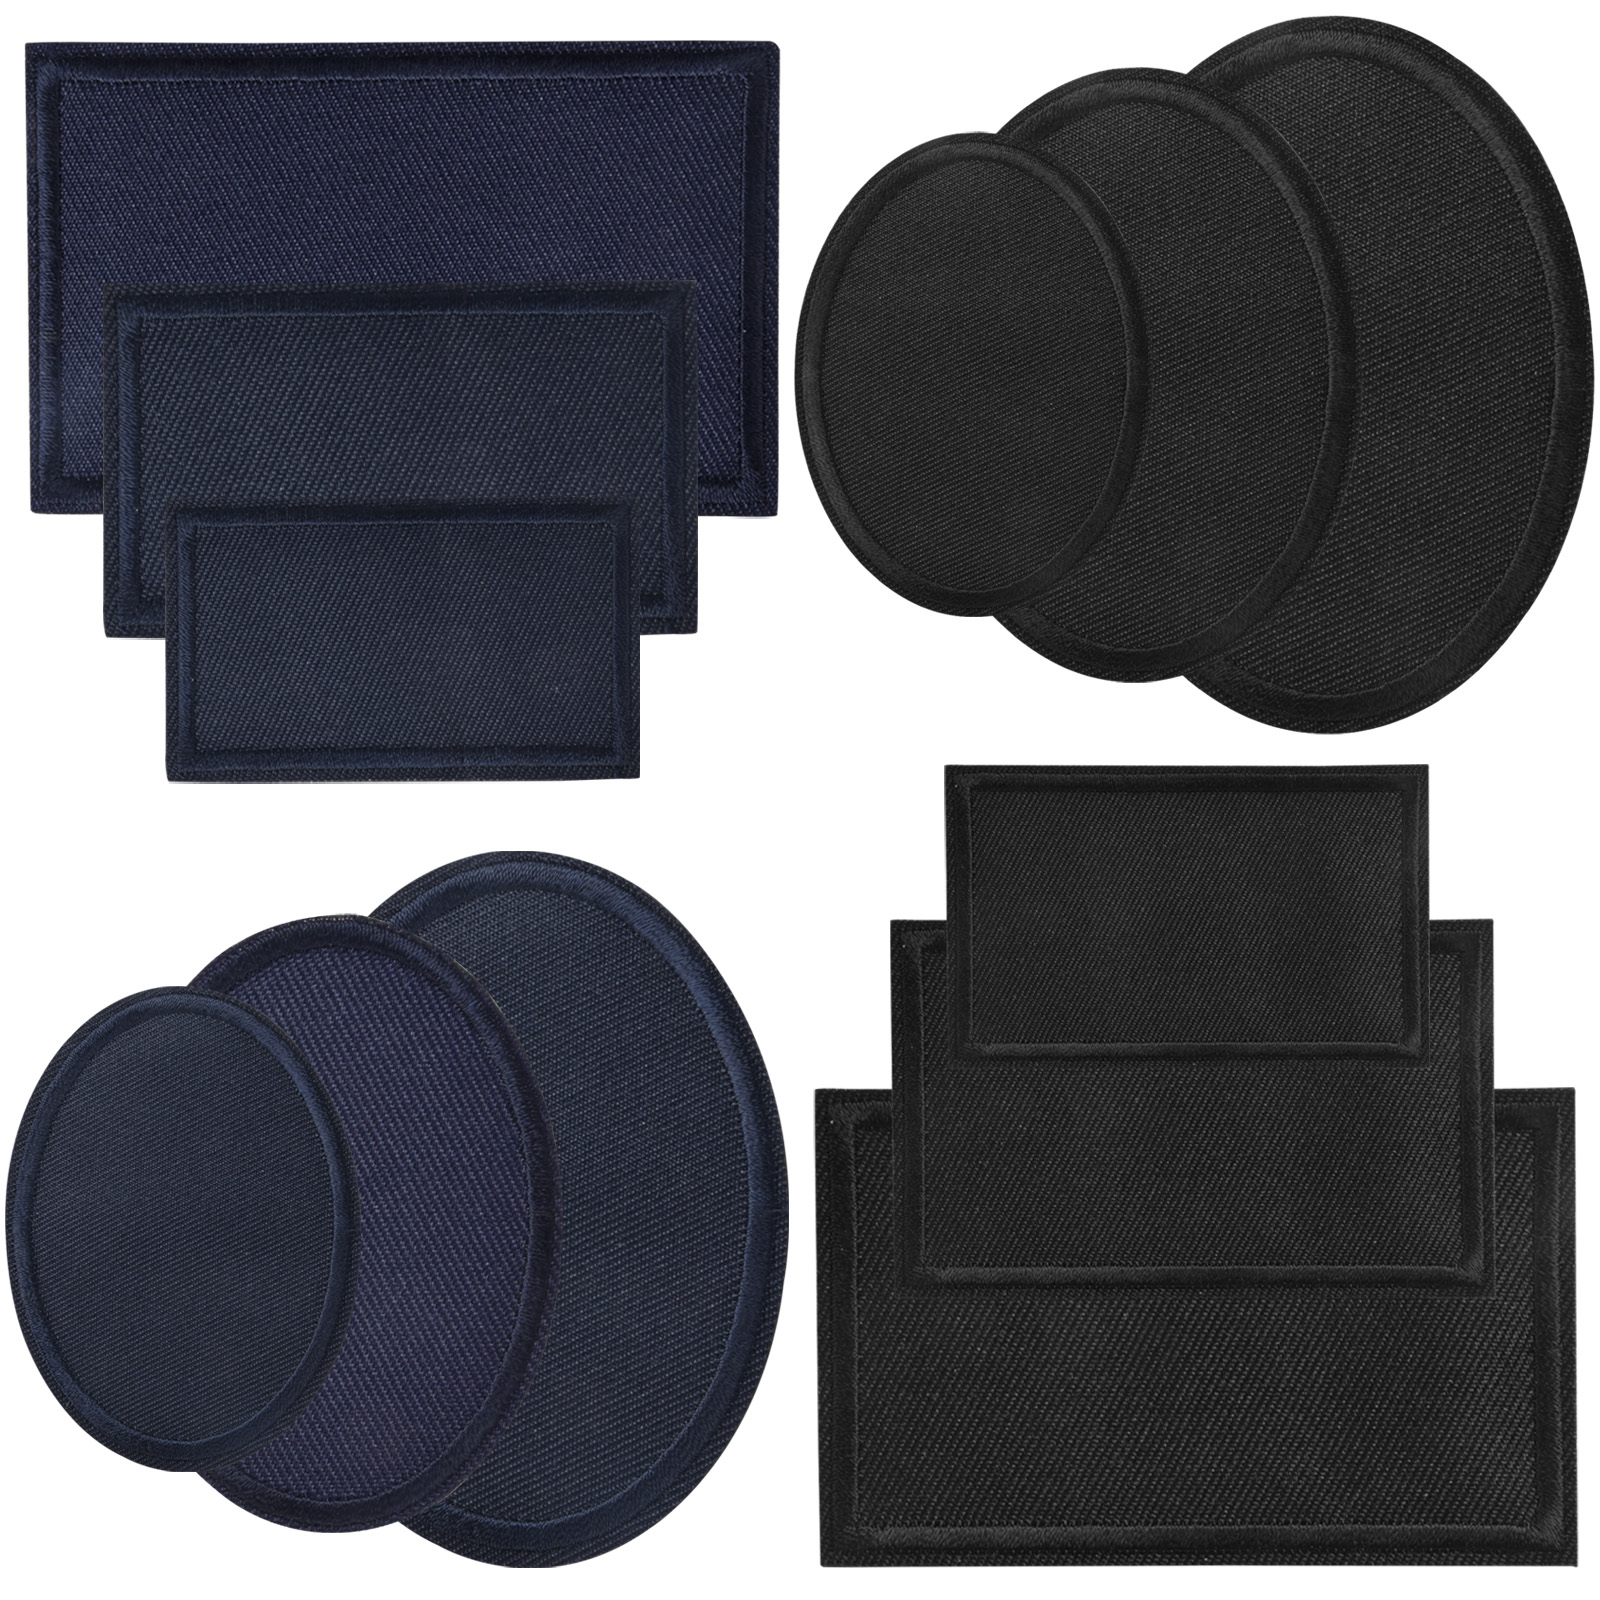  3 x 4.1 12 Pieces Black Denim Iron on Patches for Clothing  Repair, Denim Patches for Jeans Kit, Iron for Jeans & Clothing Repair :  Arts, Crafts & Sewing